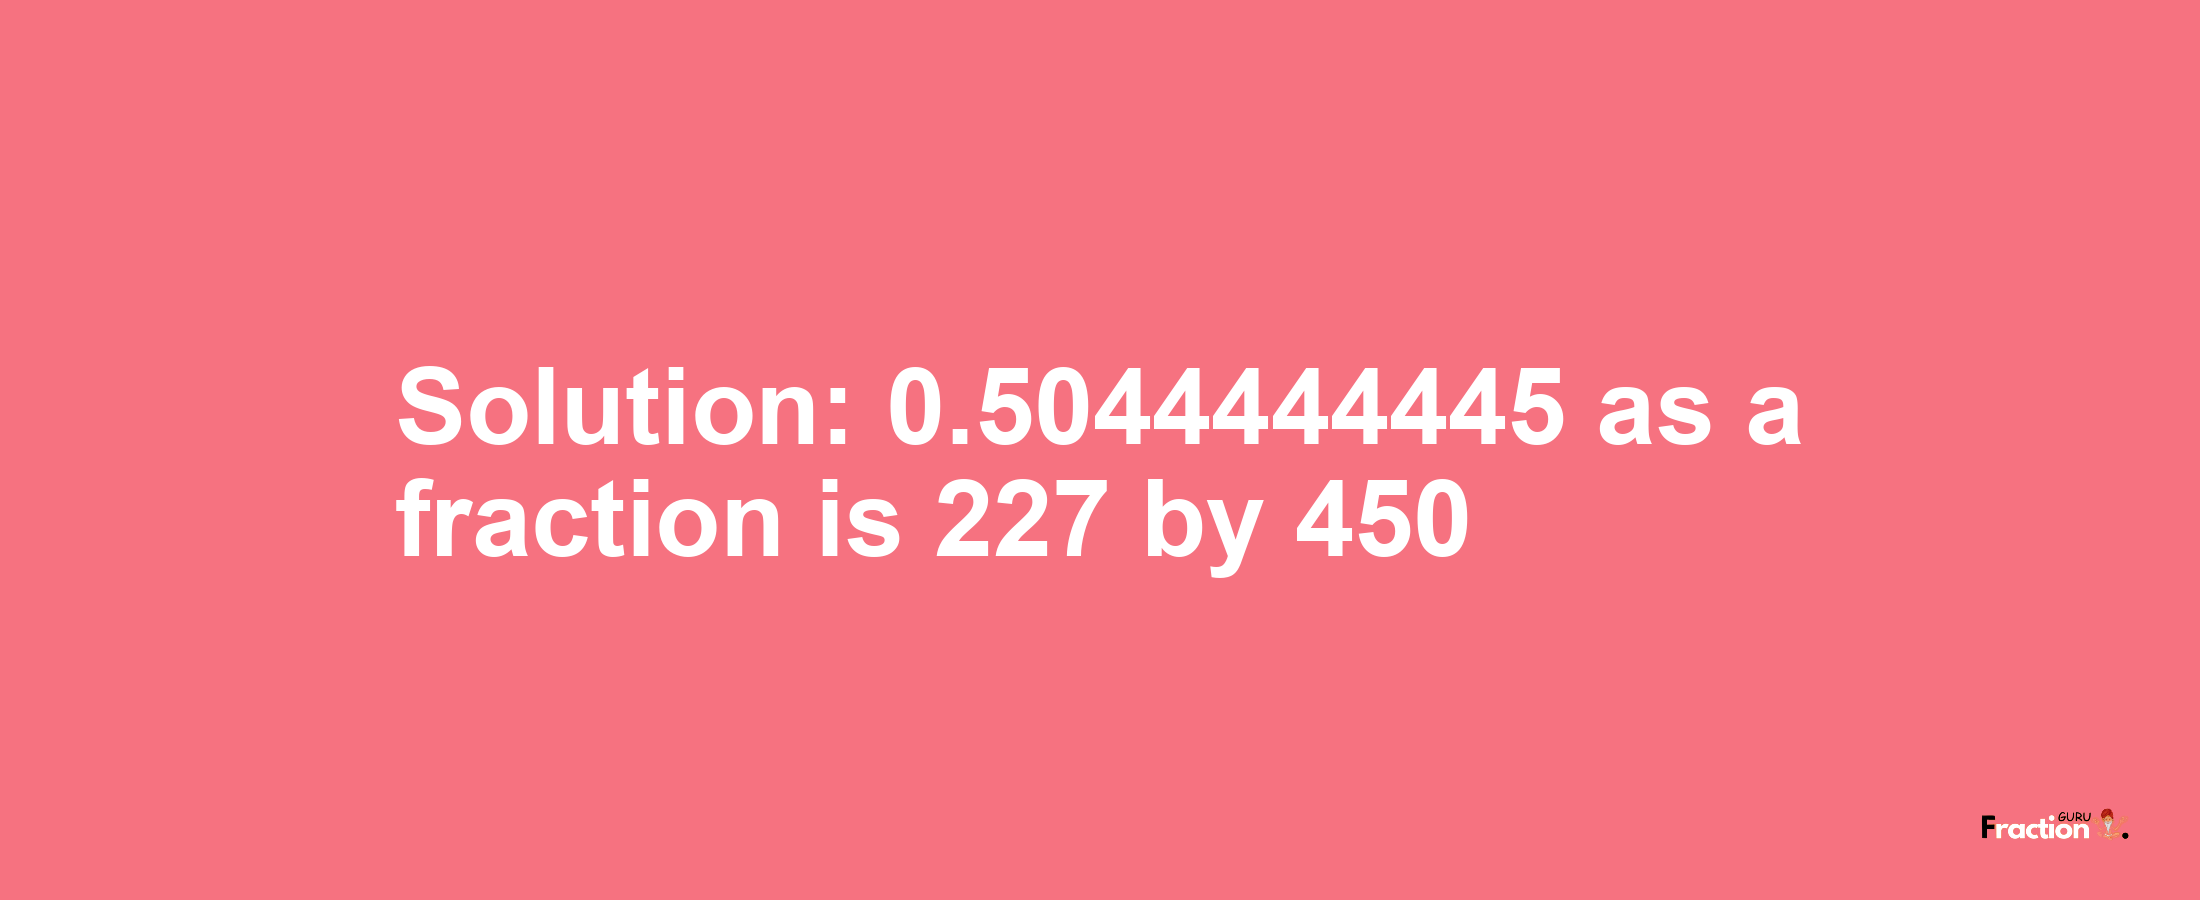 Solution:0.5044444445 as a fraction is 227/450